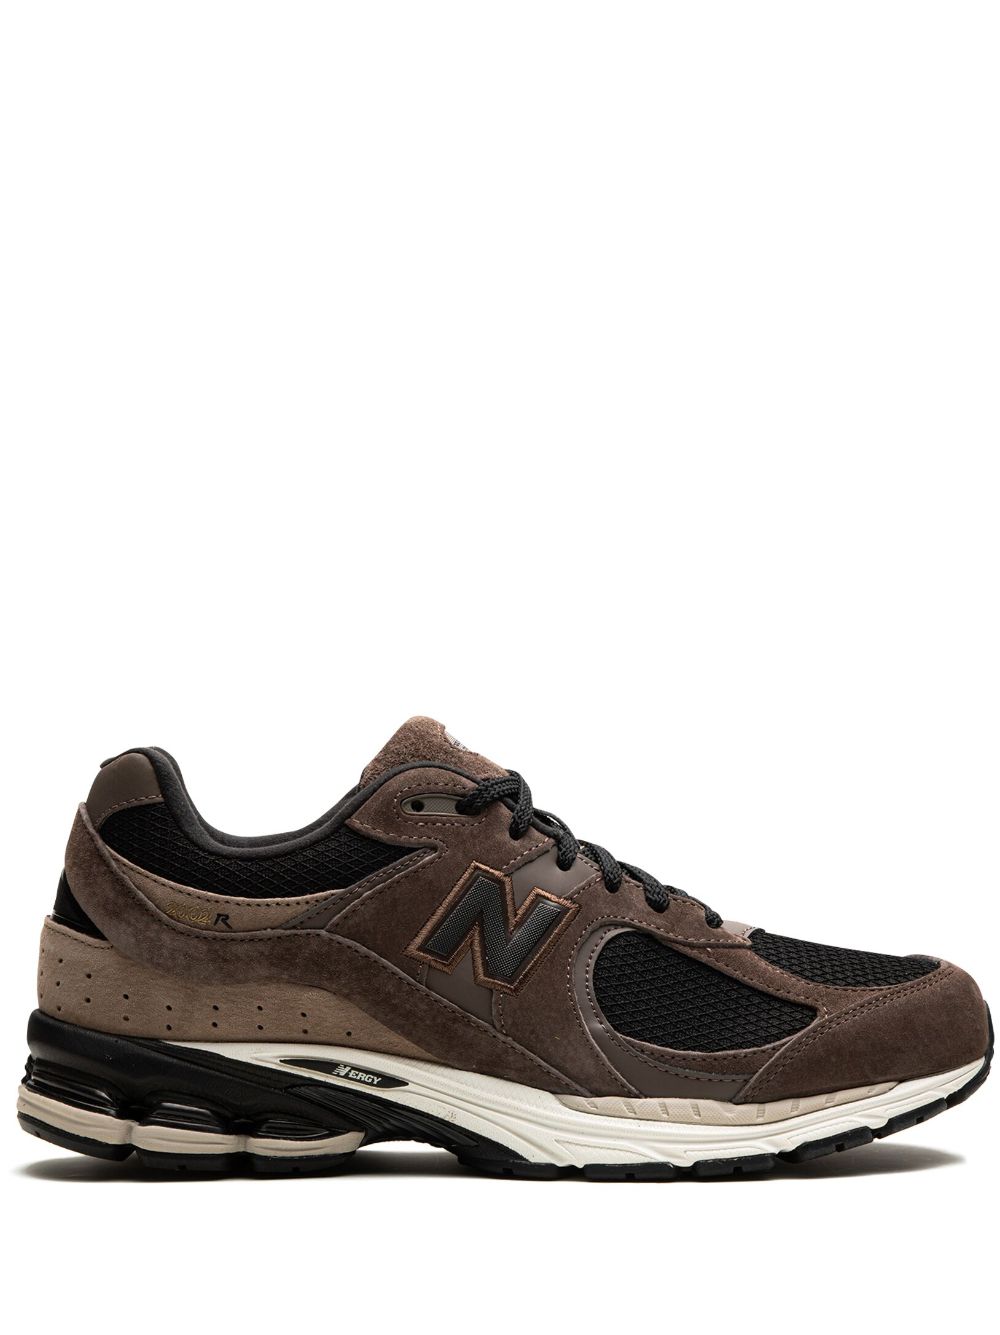 New Balance 2002R "Brown" sneakers